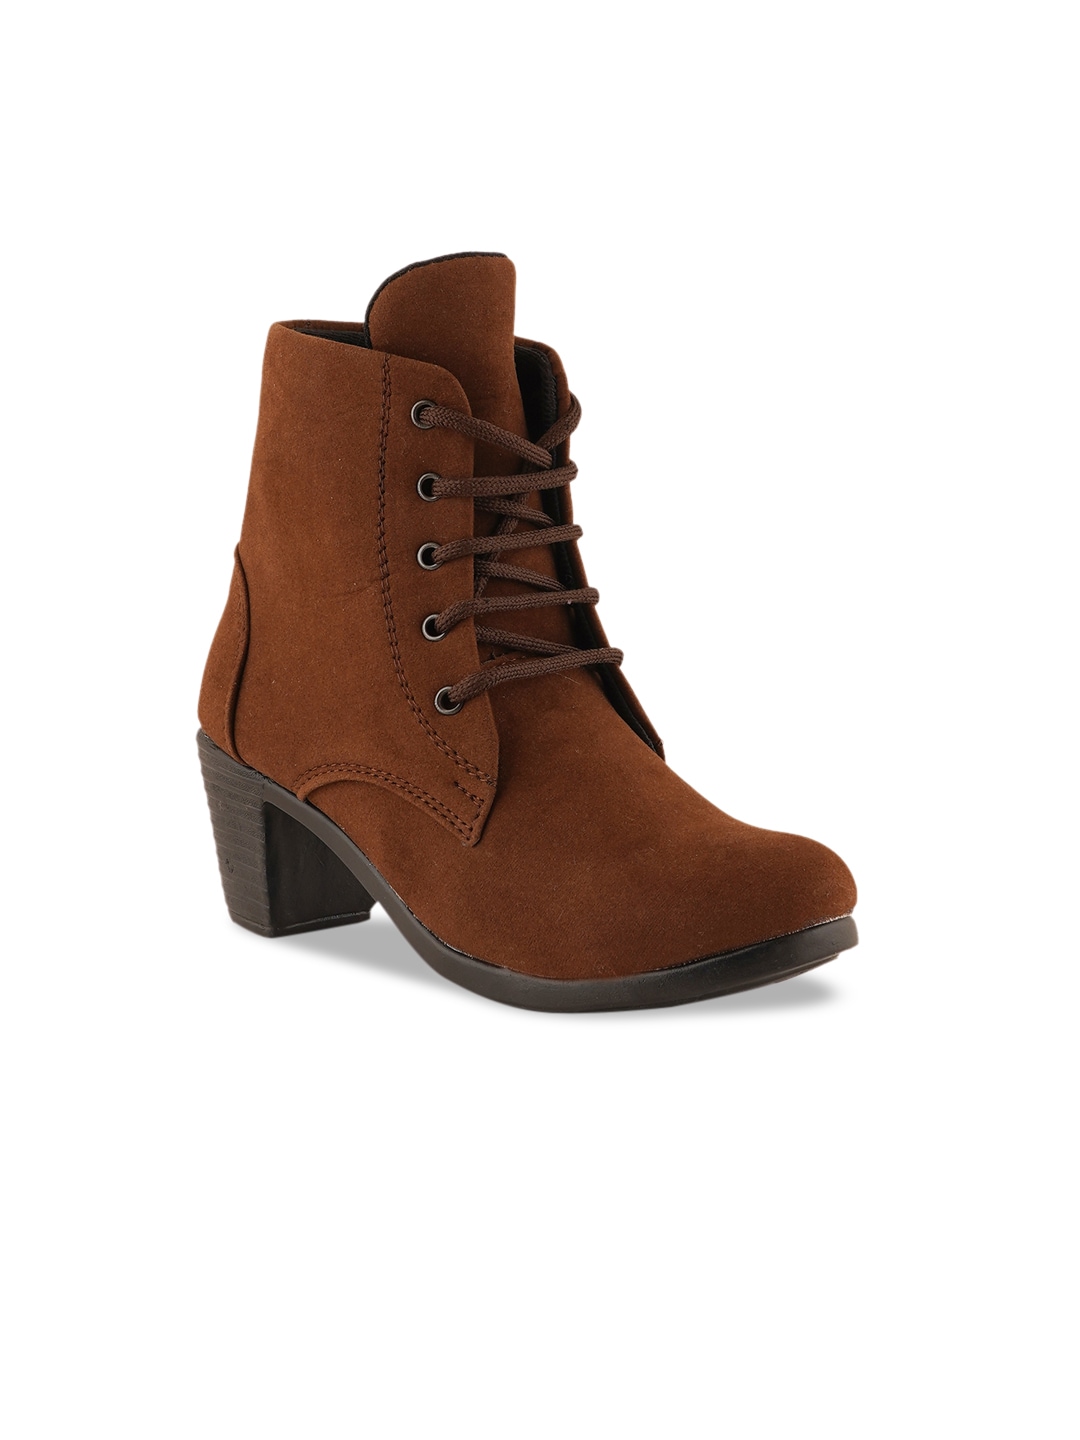 Walkfree Women Brown Suede High-Top Boots Price in India